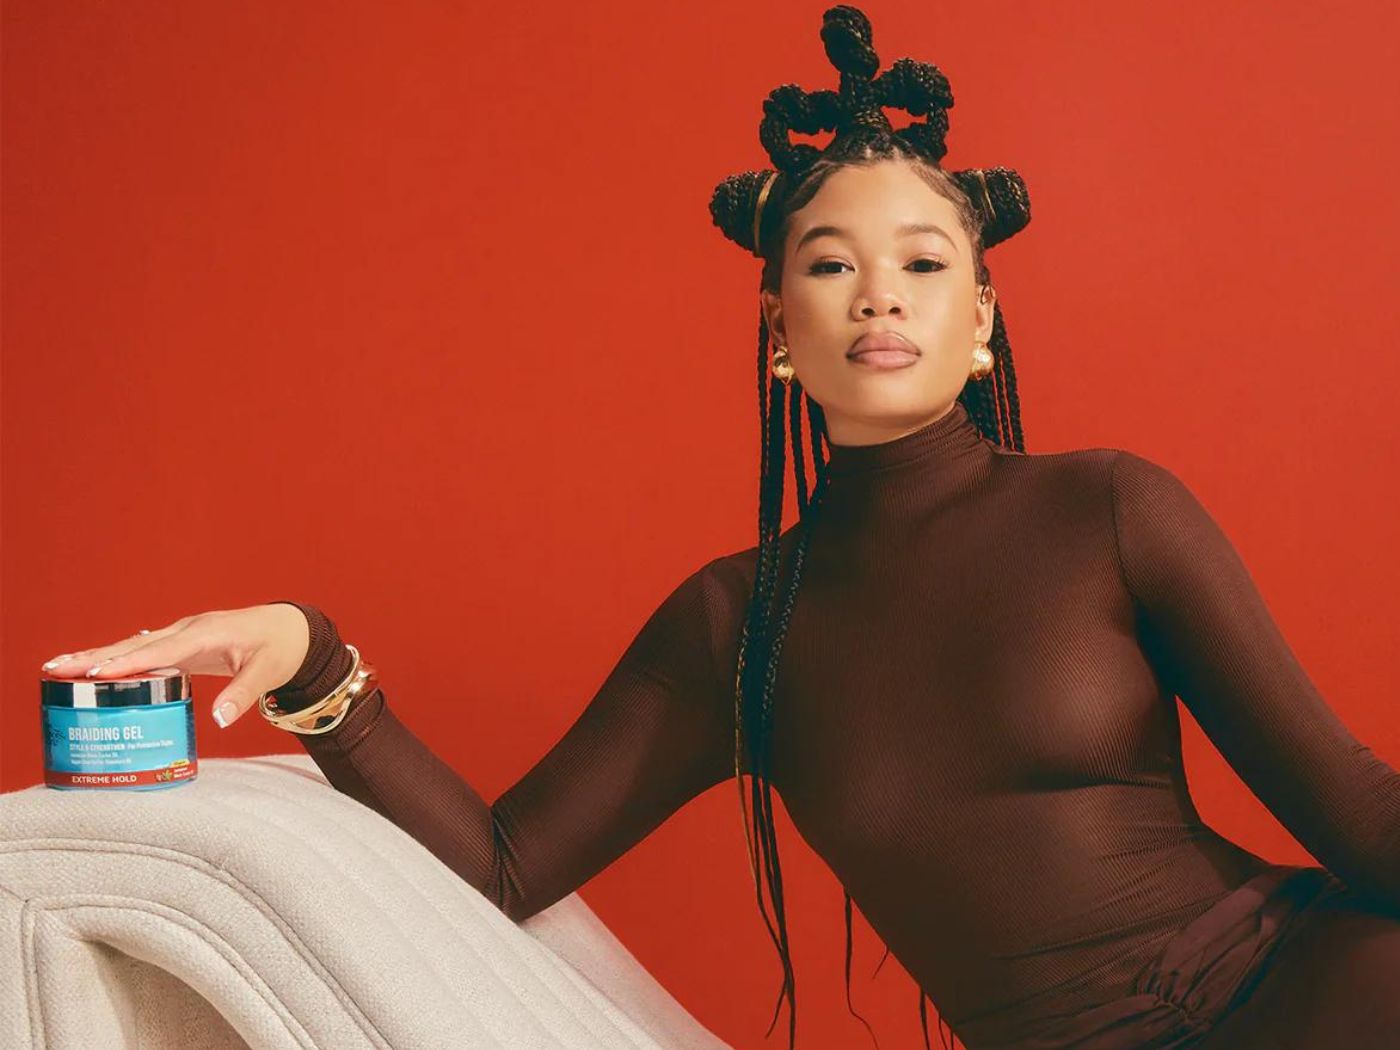 Actress Storm Reid poses on a couch with a tub of Kiss braiding gel.